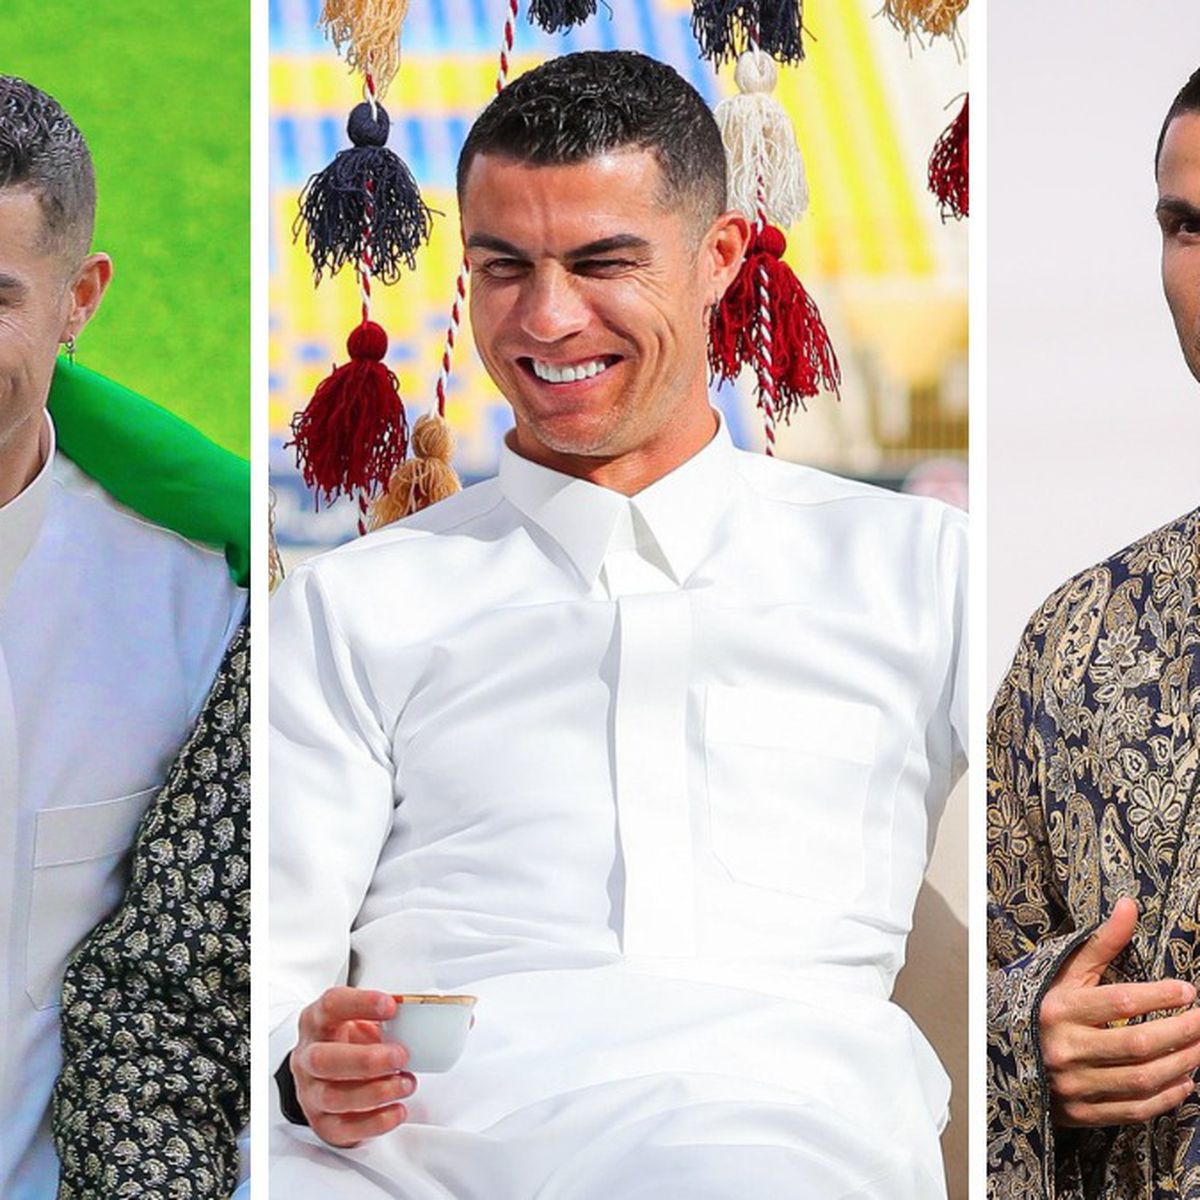 Cristiano Ronaldo Style Outfits: Men's Fashion In 2023 in 2023